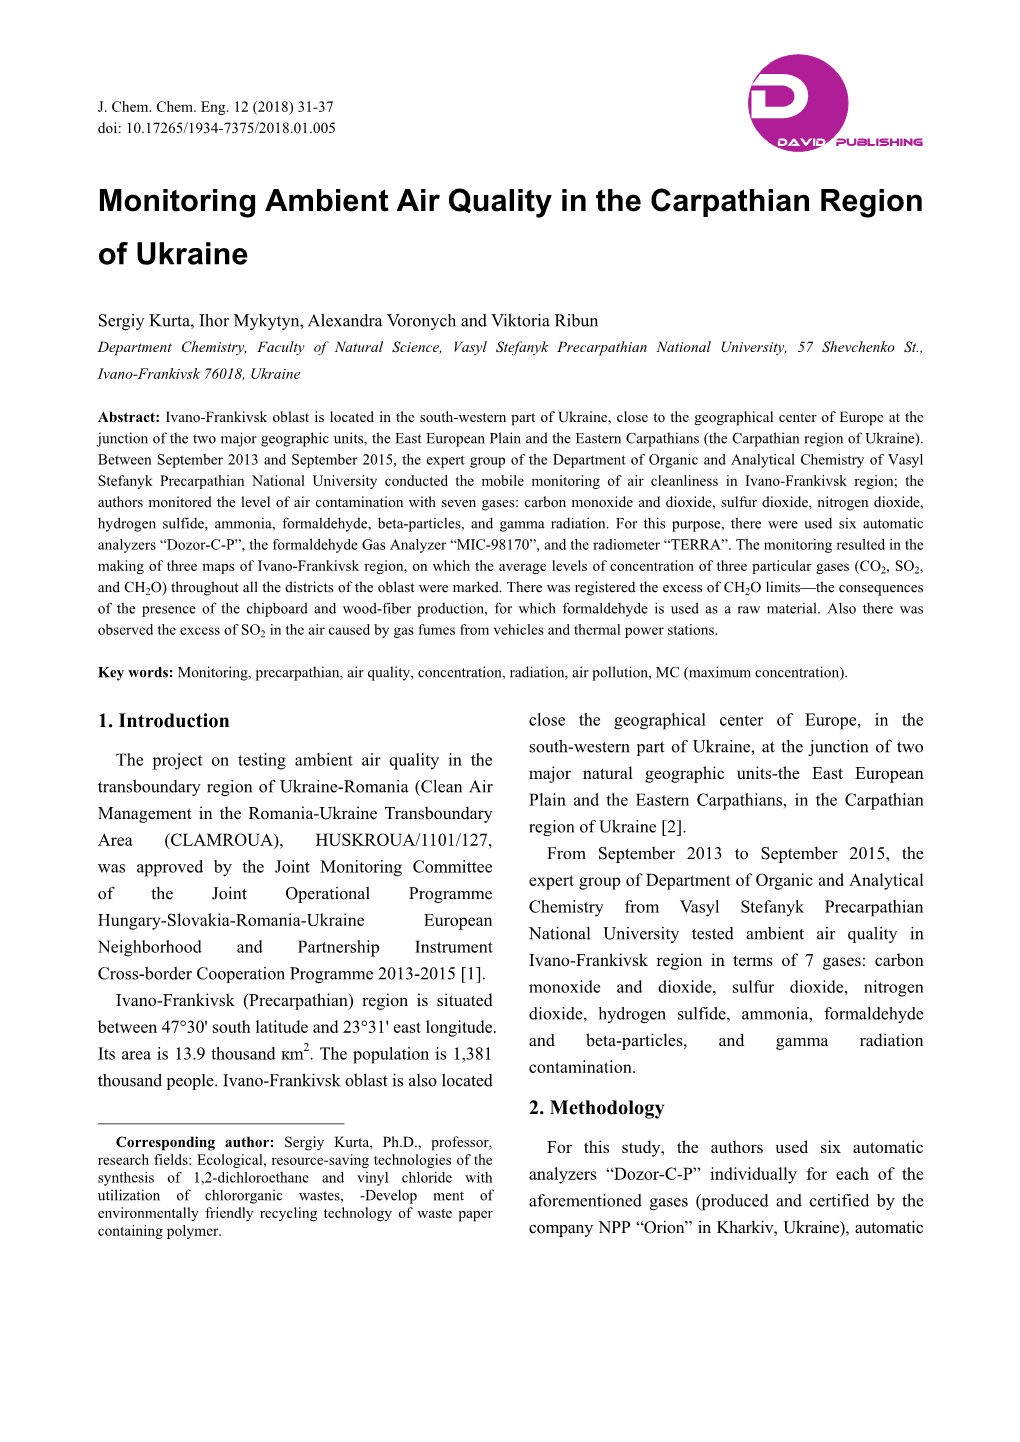 Monitoring Ambient Air Quality in the Carpathian Region of Ukraine